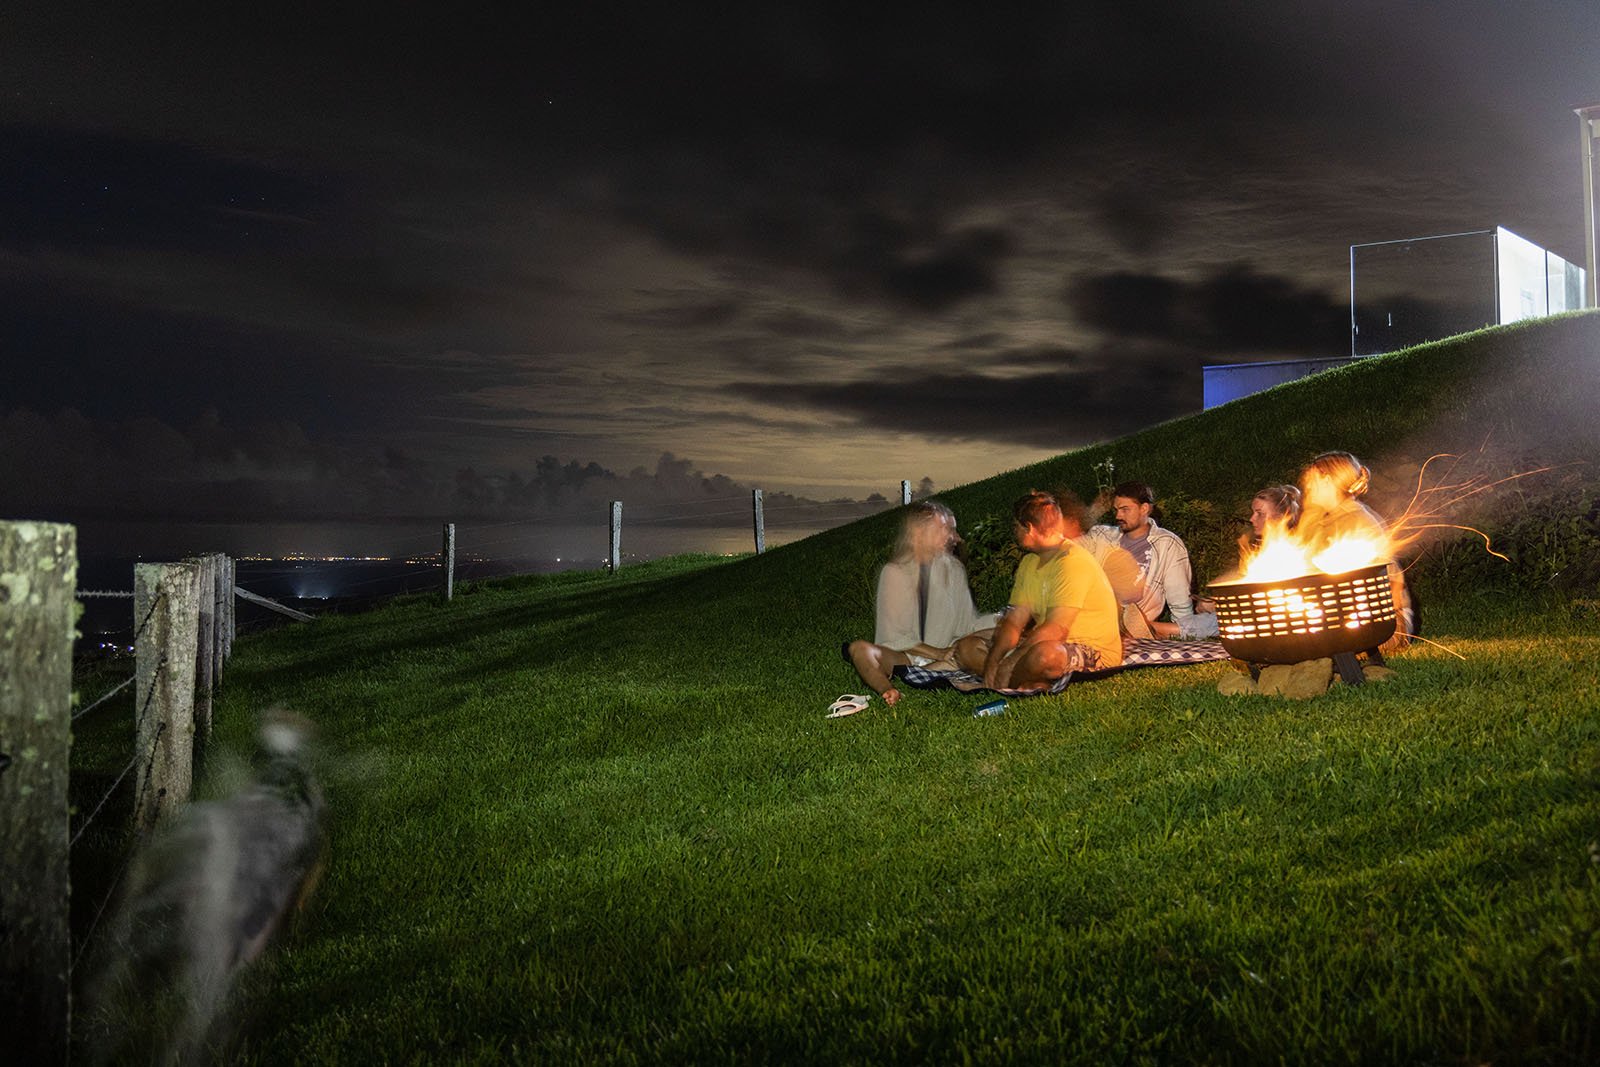 Gather around a glowing fire pit on a grassy hill under a starry night sky, with a dimly lit horizon in the background.